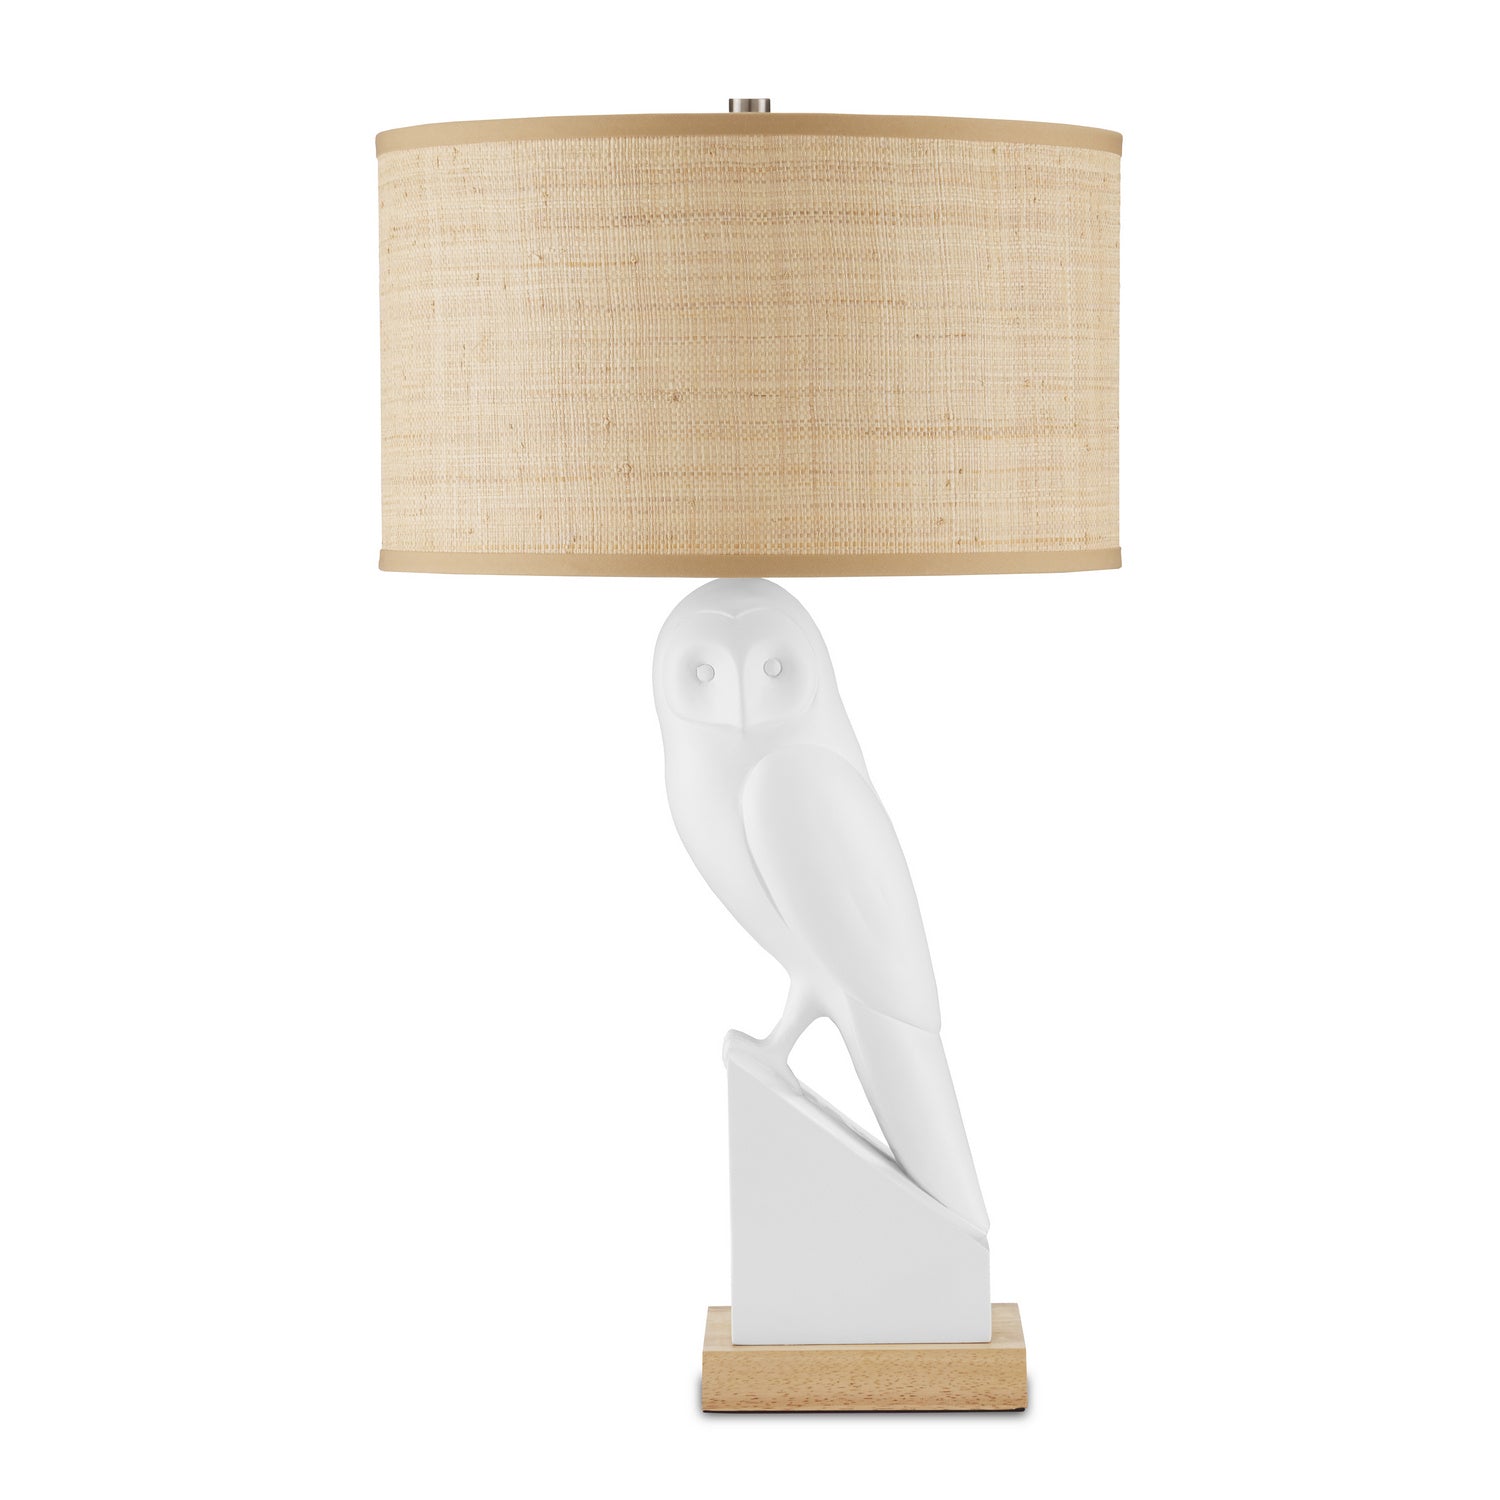 One Light Table Lamp from the Snowy collection in White/Natural Wood/Polished Nickel finish